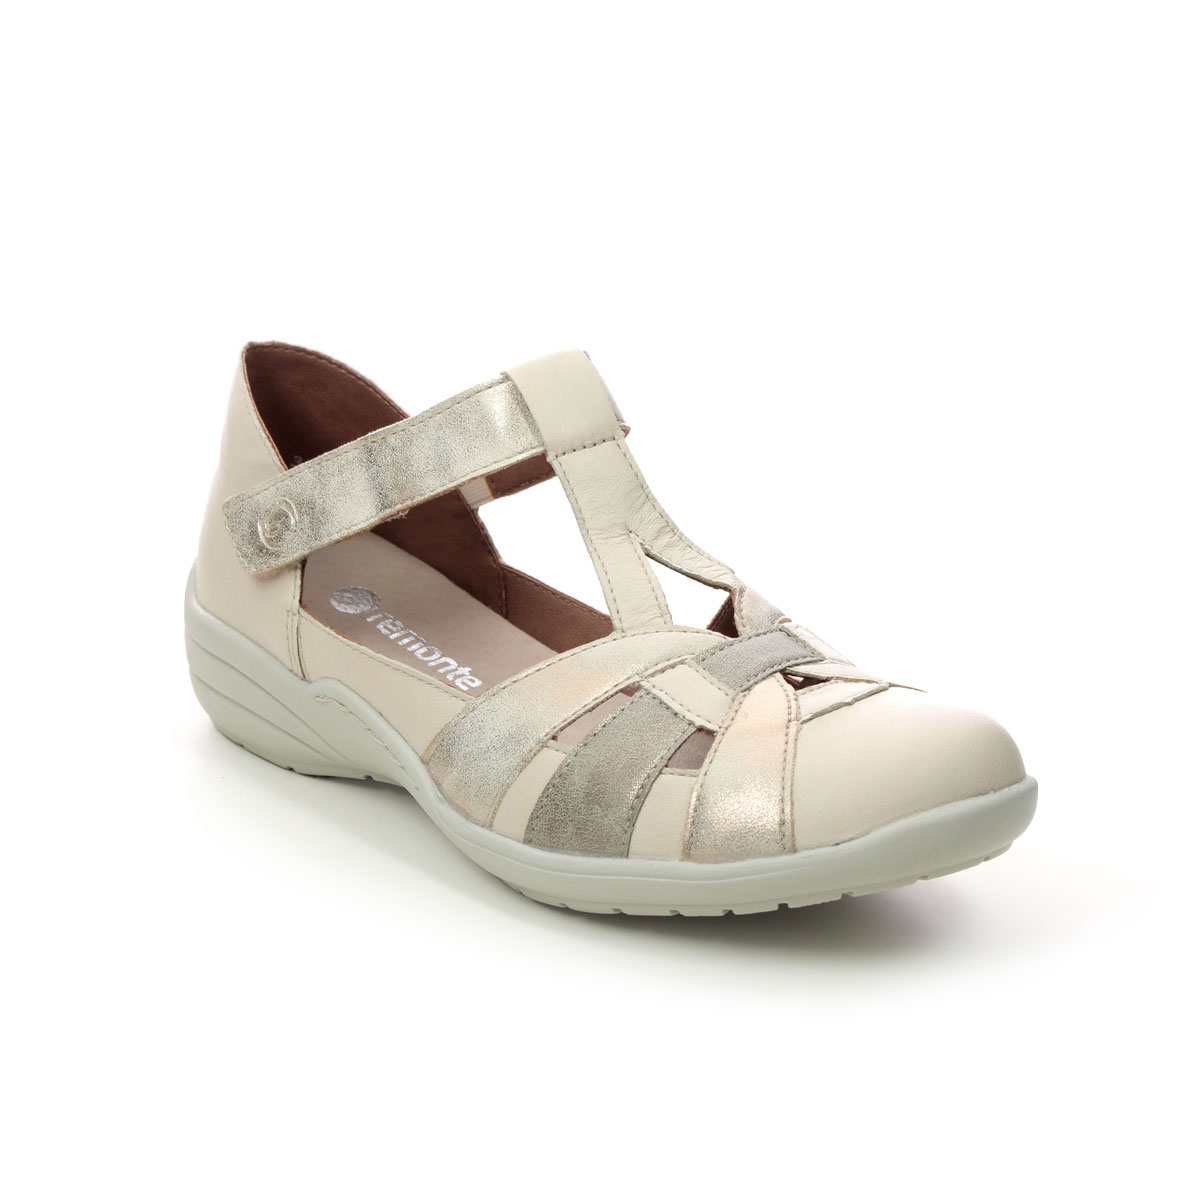 Remonte Bertavall Beige Leather Womens Closed Toe Sandals R7601-80 In Size 39 In Plain Beige Leather